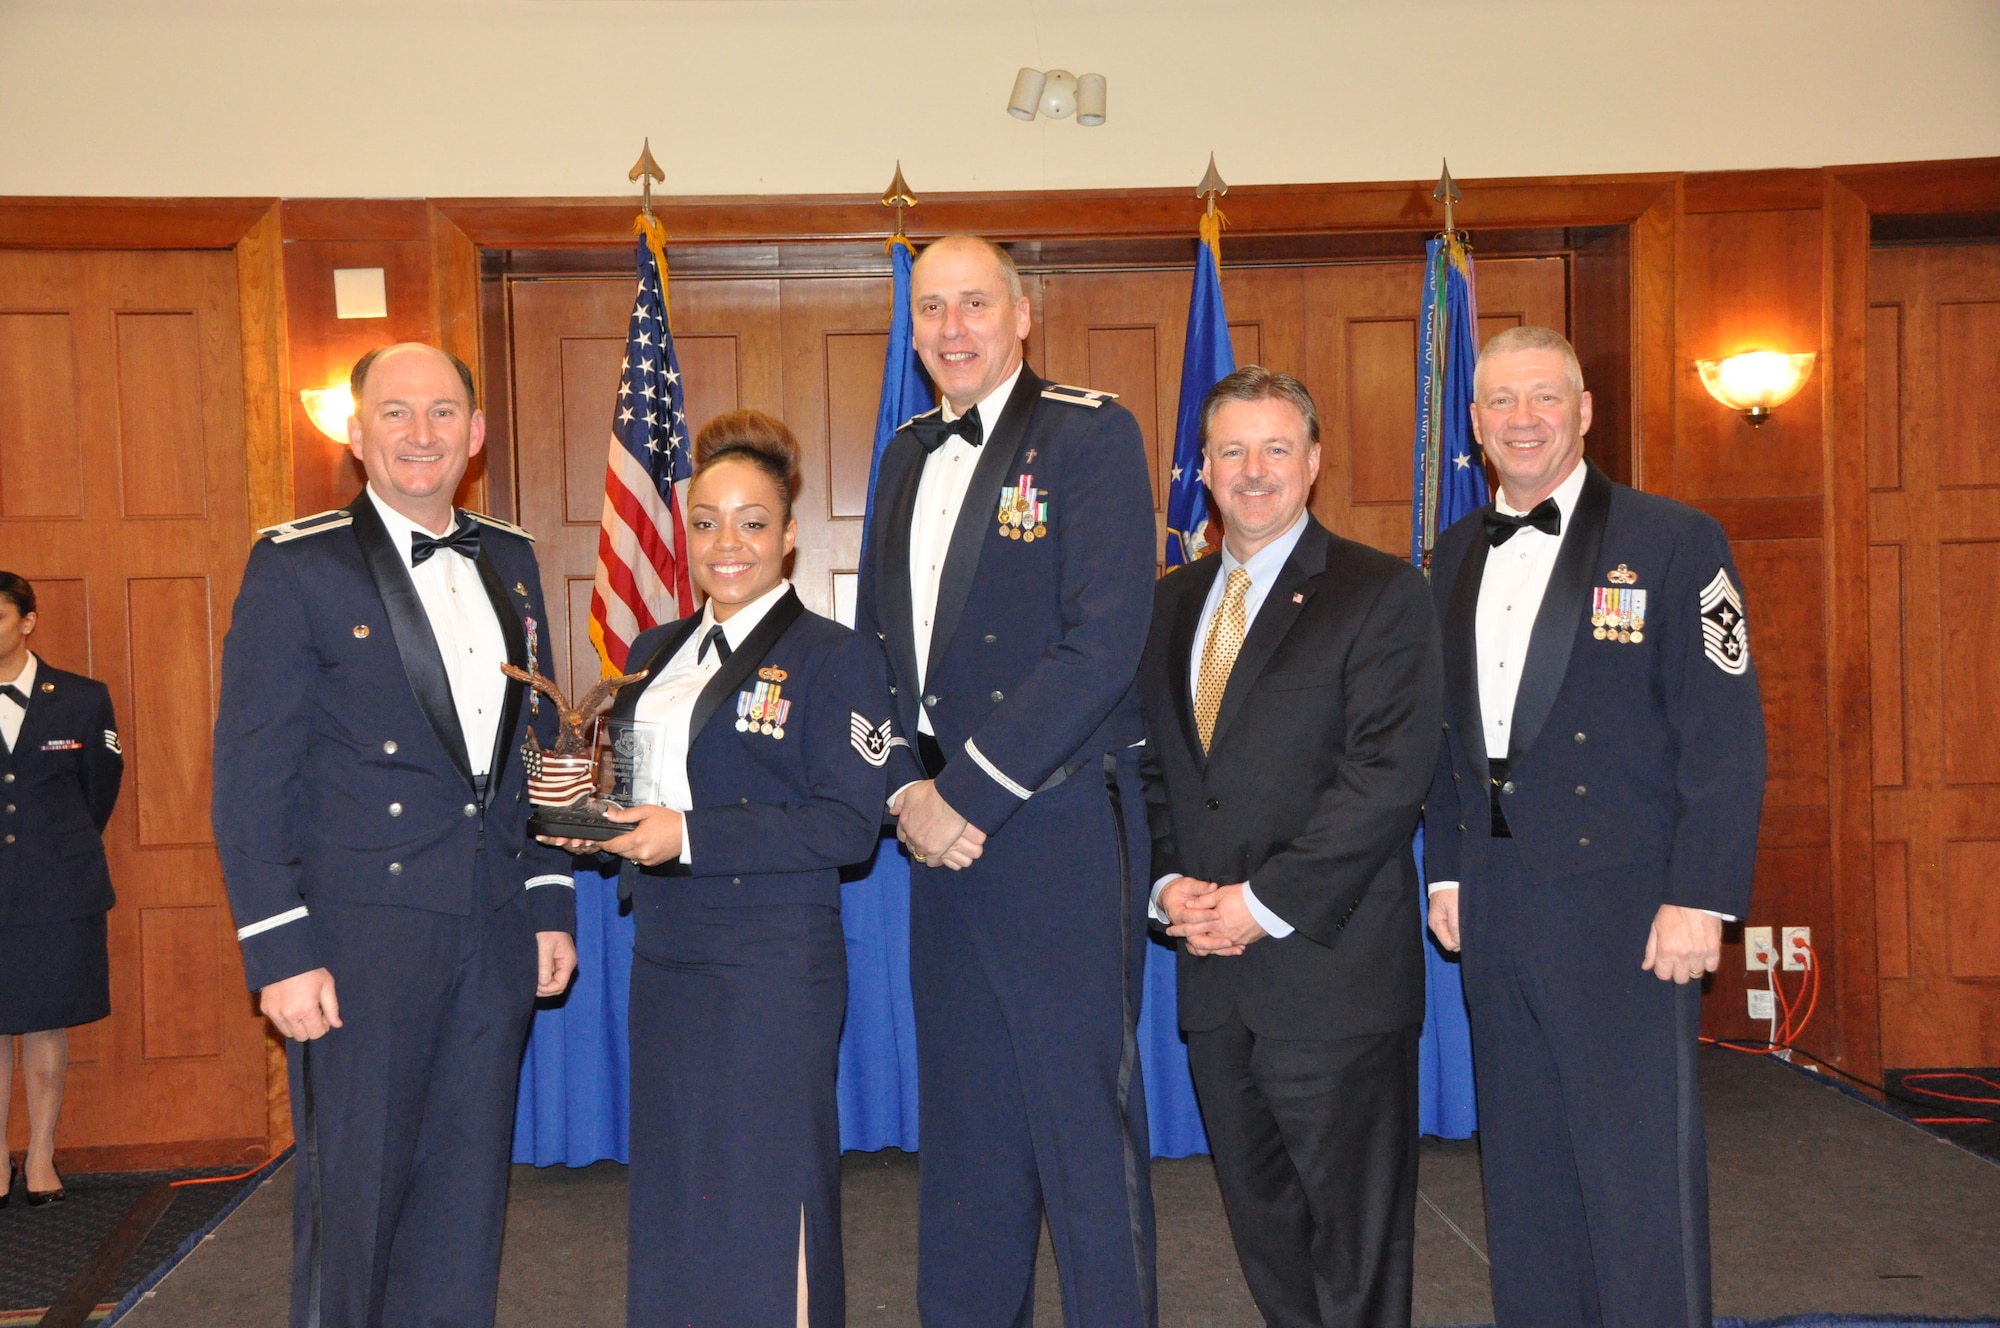 Technical Sgt. Shakia Johnson, 459th Logistics Readiness Squadron, wins the Non-Commissioned Officer of the Year award at the 459 ARW Annual Awards Banquet on Saturday, March 7, 2015. (Air Force Photo / SrA Kristin Kurtz)